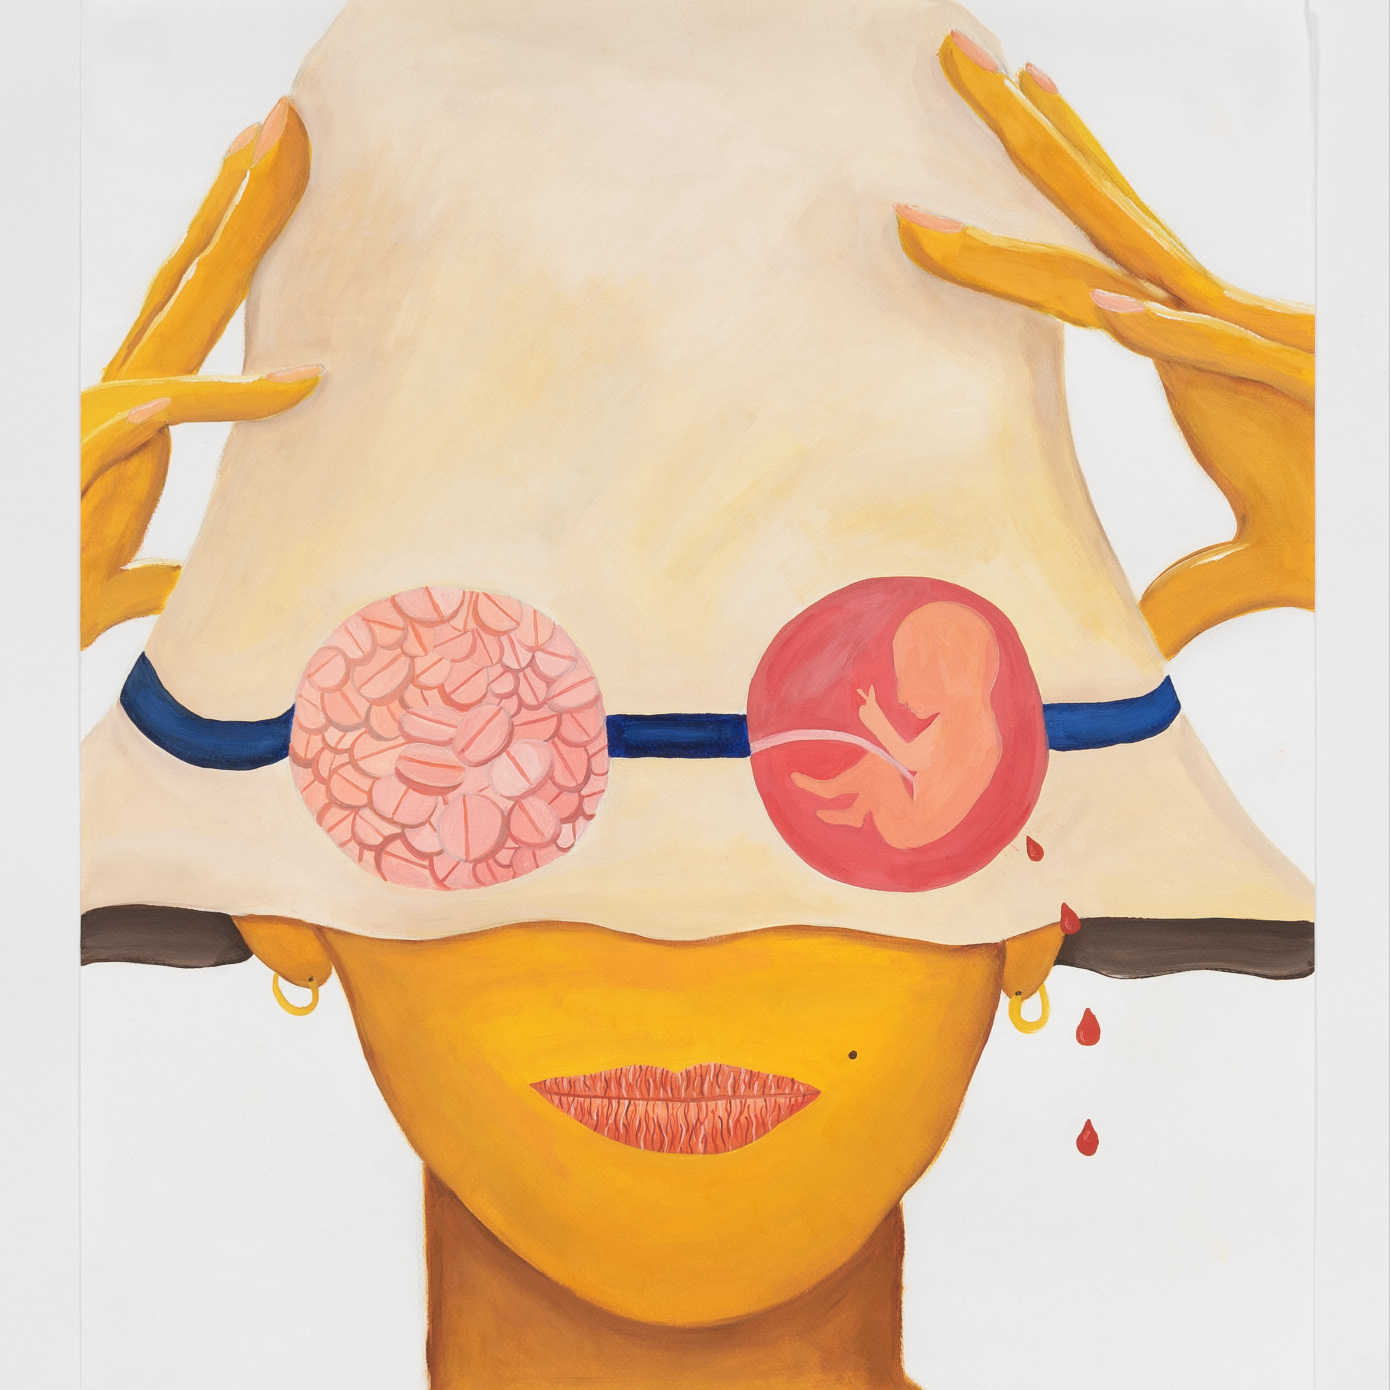 Anat Ebgi Gallery and Artsy Host an Auction to Support Bodily Rights